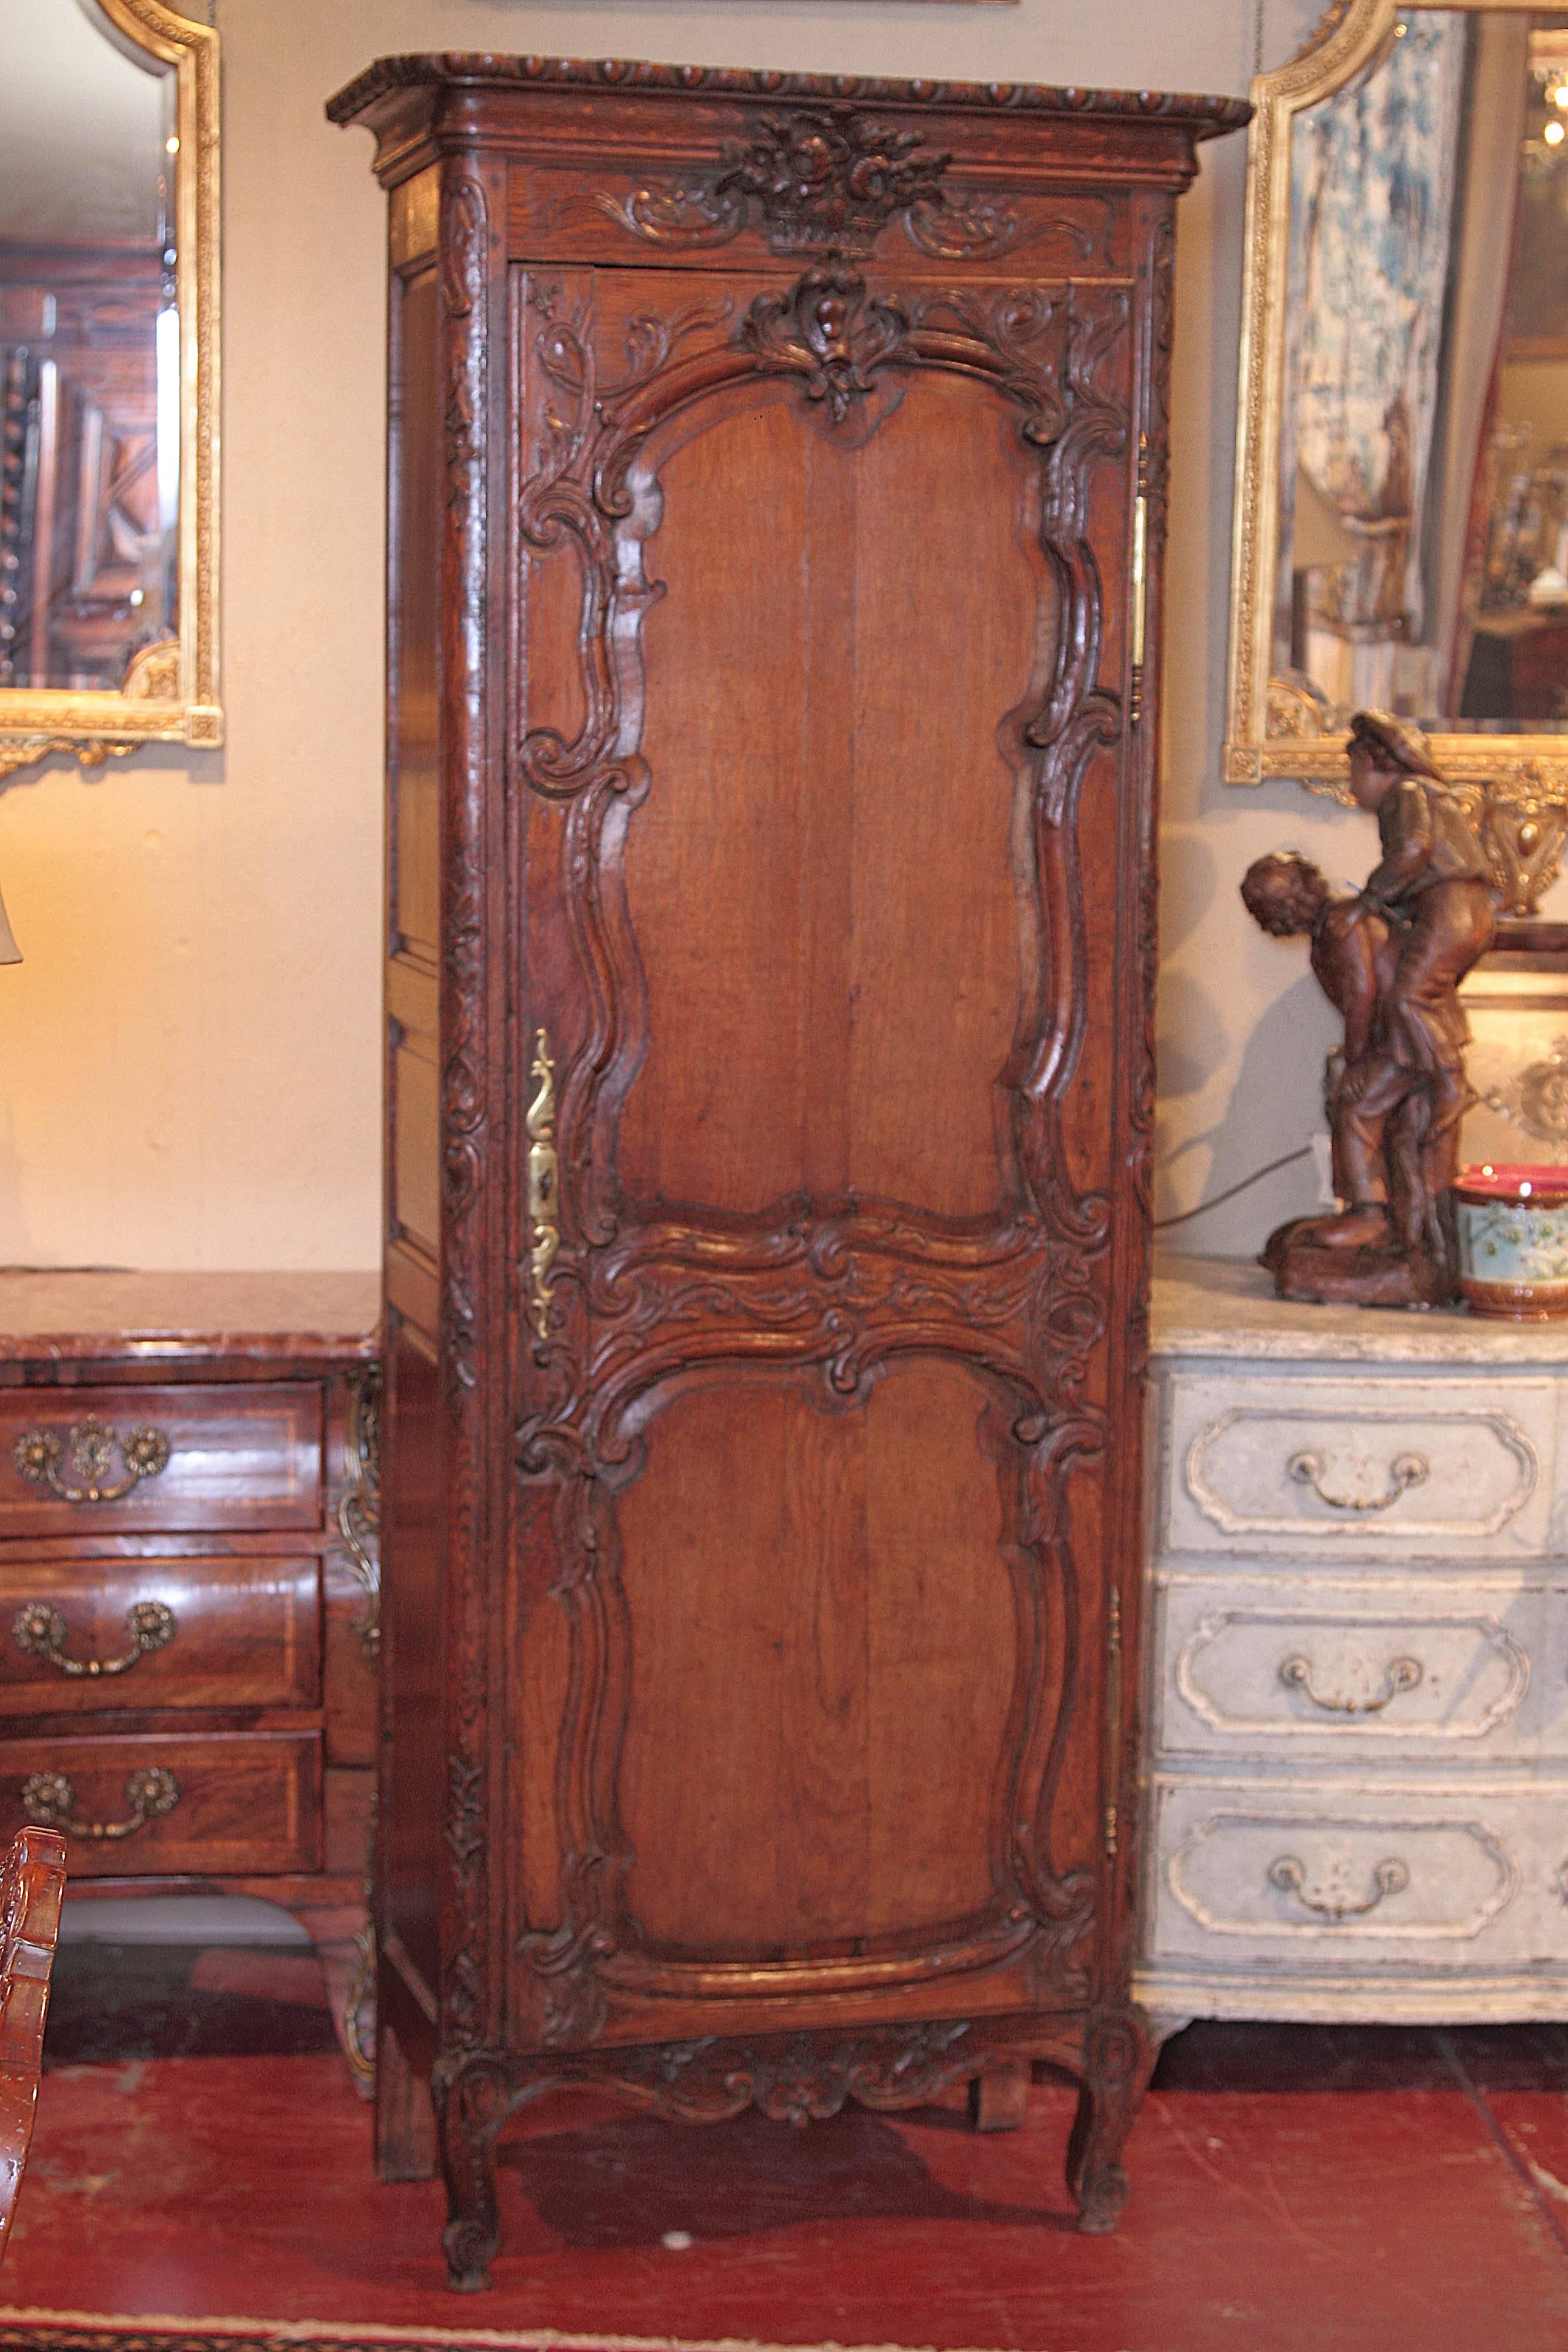 Add beautiful storage to your home with this nicely carved, antique bonnetiere from the Normandy region of France, circa 1820. This one door armoire with four inside shelves features Fine carvings with a detailed flower bouquet, scrolled feet and a